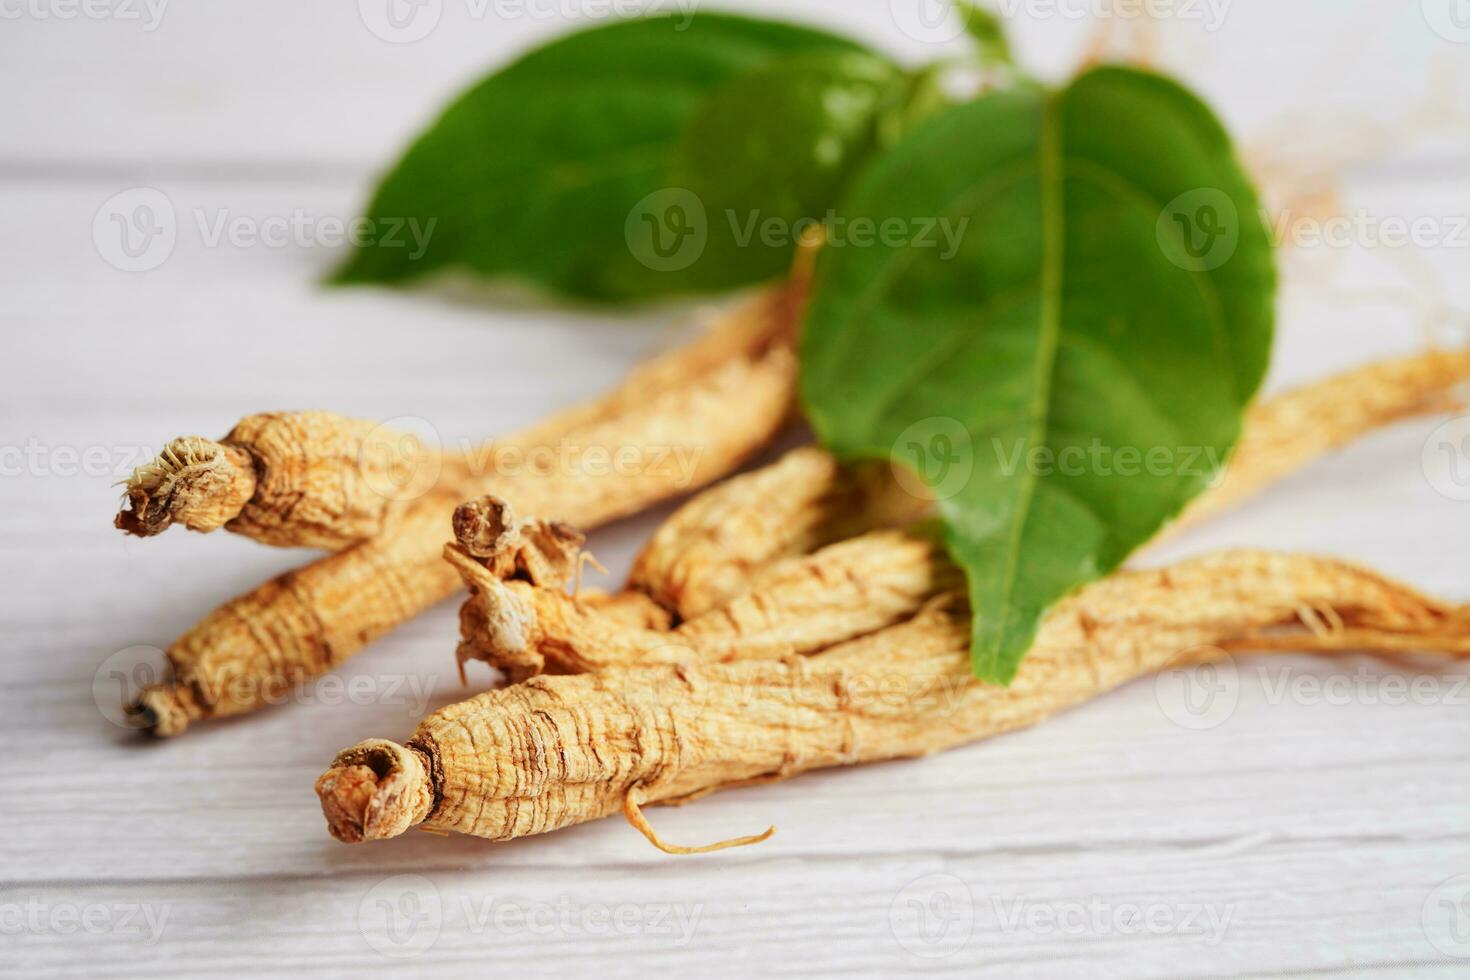 Ginseng roots and green leaf, organic nature healthy food. photo